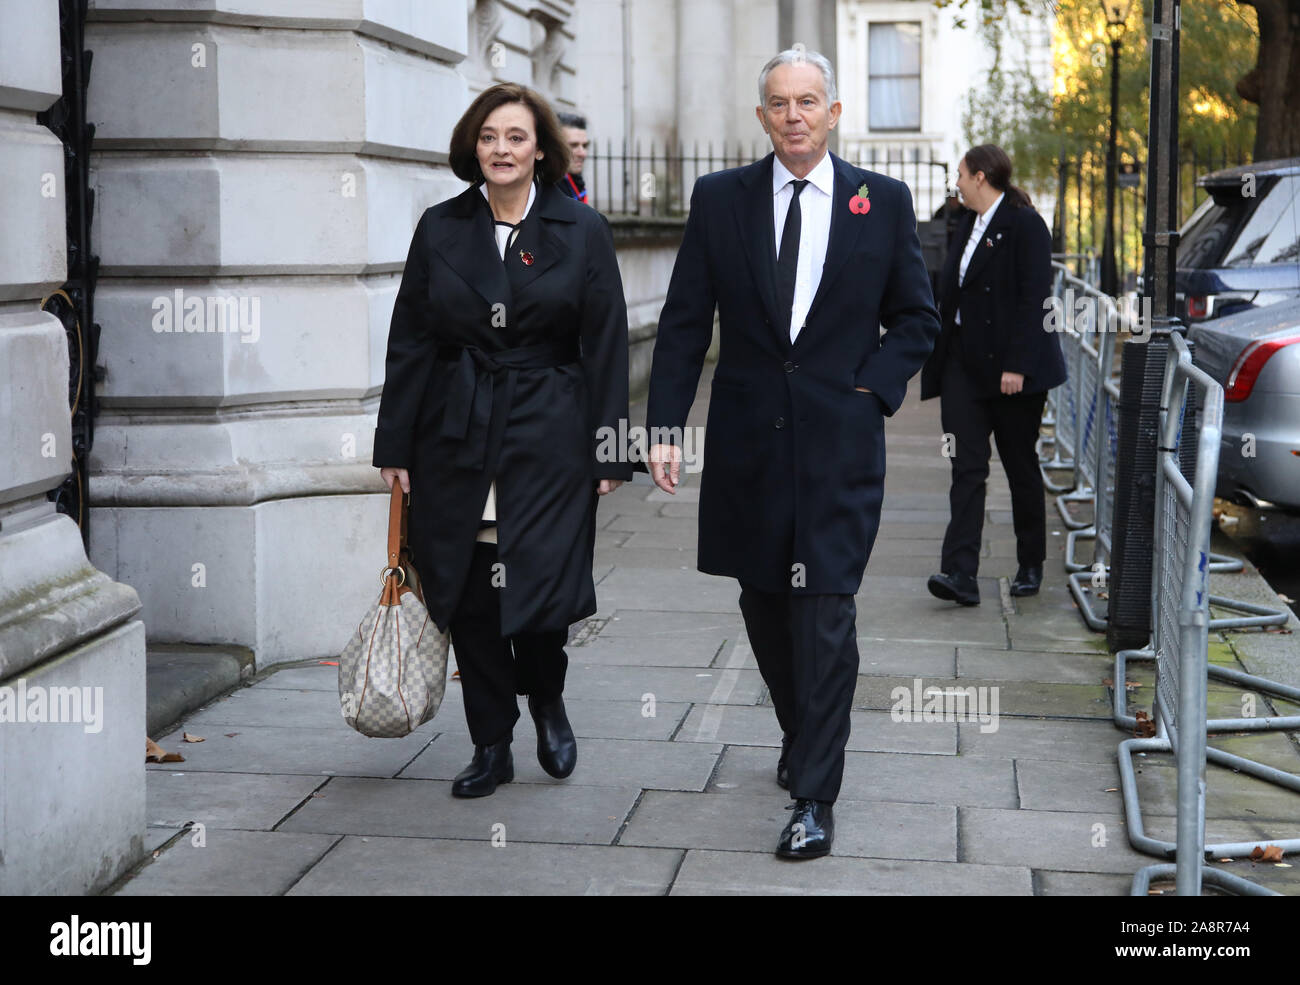 London, UK. 10th Nov, 2019. Former Prime Minister Tony Blair, and wife Cherie arrive in Downing Street on the way to the Remembrance Sunday ceremony at the Cenotaph in Whitehall. Remembrance Sunday, London, on November 10, 2019. Credit: Paul Marriott/Alamy Live News Stock Photo